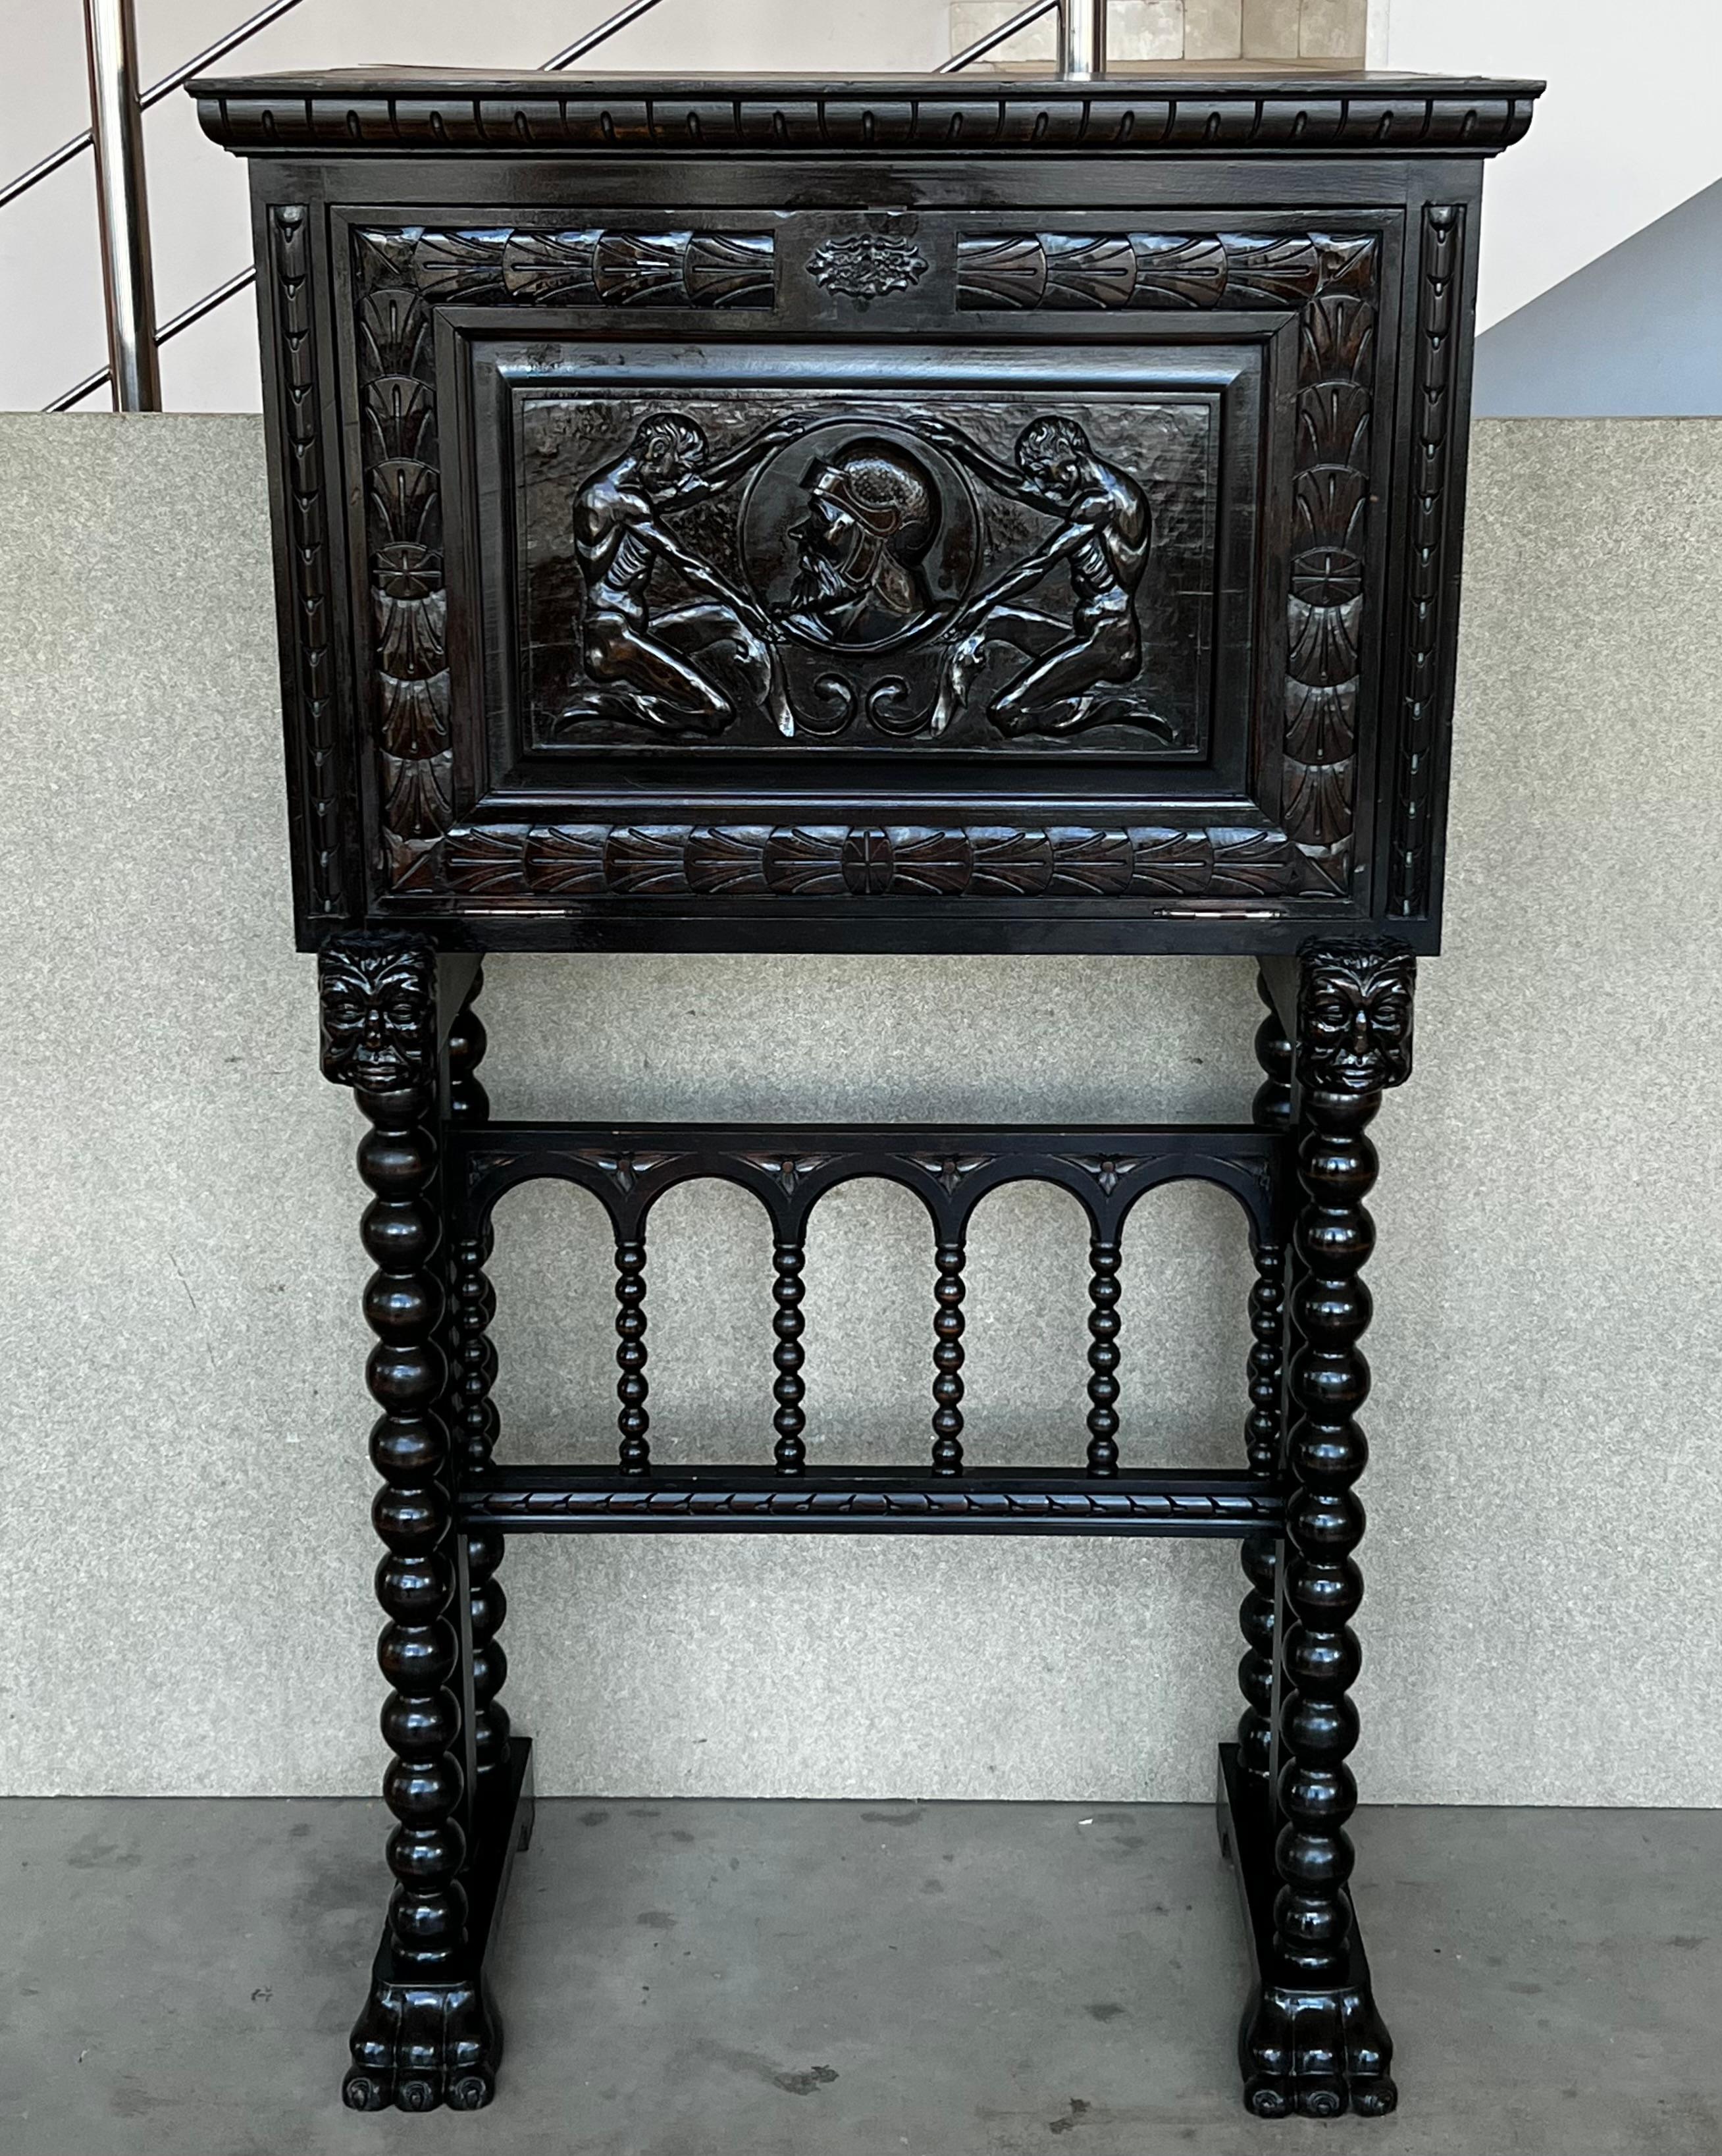 This Bargueno is embellished with a carving of Don Quixote de la Mancha bordered with branches of leaves. The desk is supported by a pedestal joined by a bridge of turned columns. The front legs contain a carving of two wind god heads with an